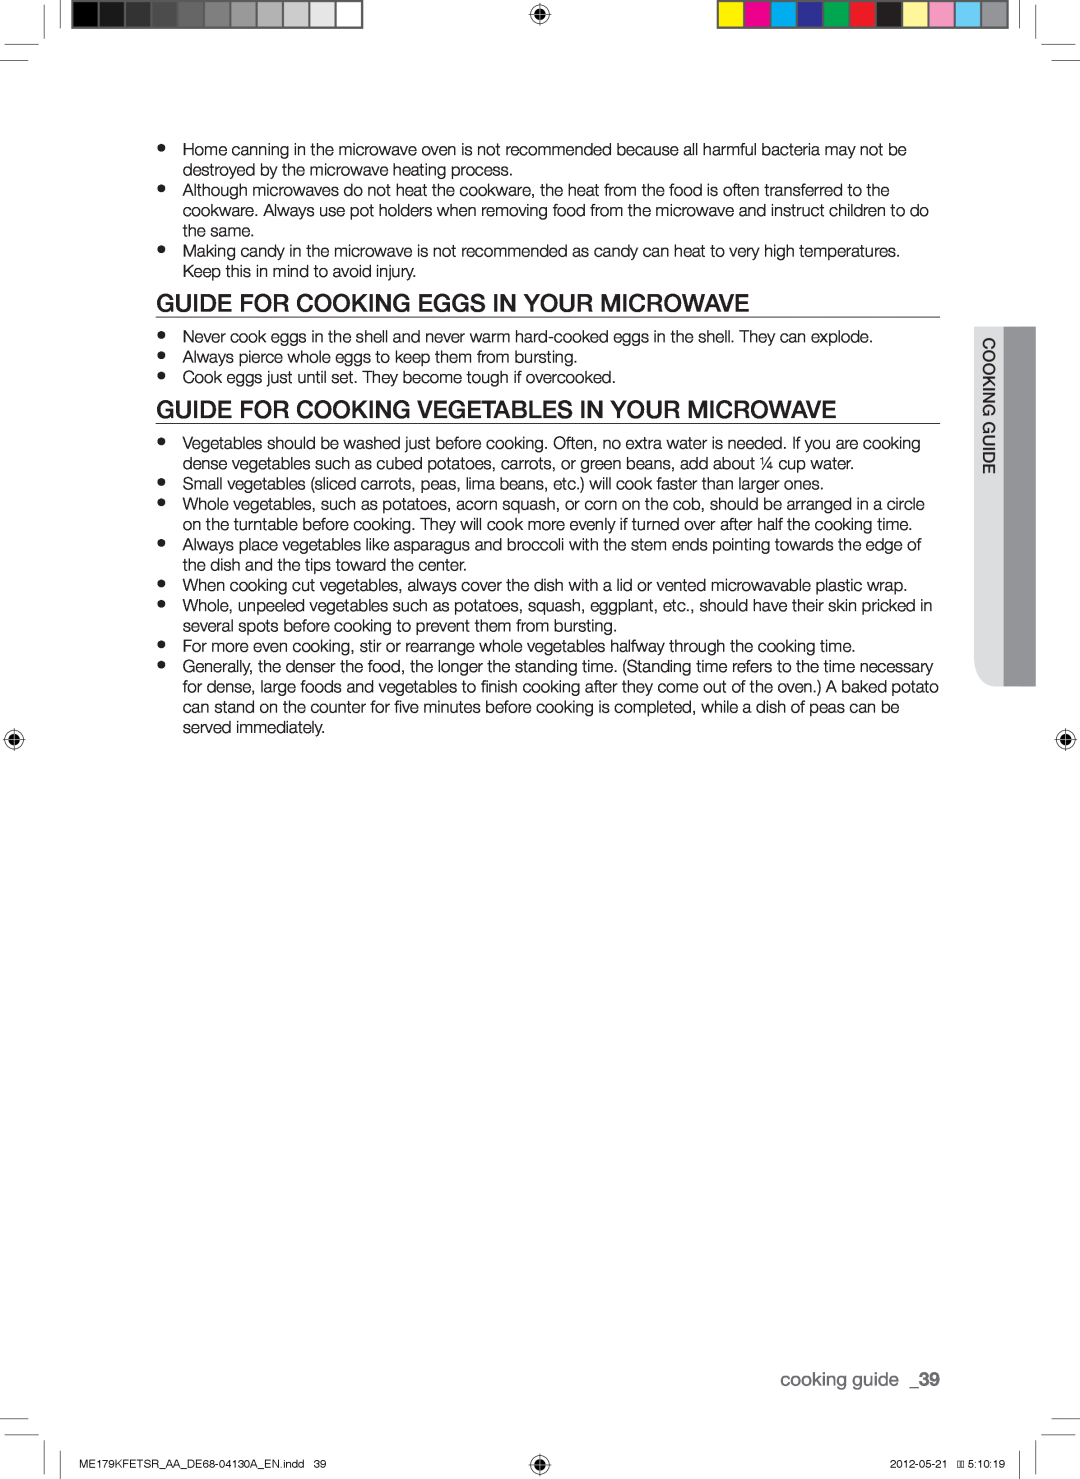 Samsung ME179KFETSR user manual Guide For Cooking Eggs In Your Microwave, Guide For Cooking Vegetables In Your Microwave 